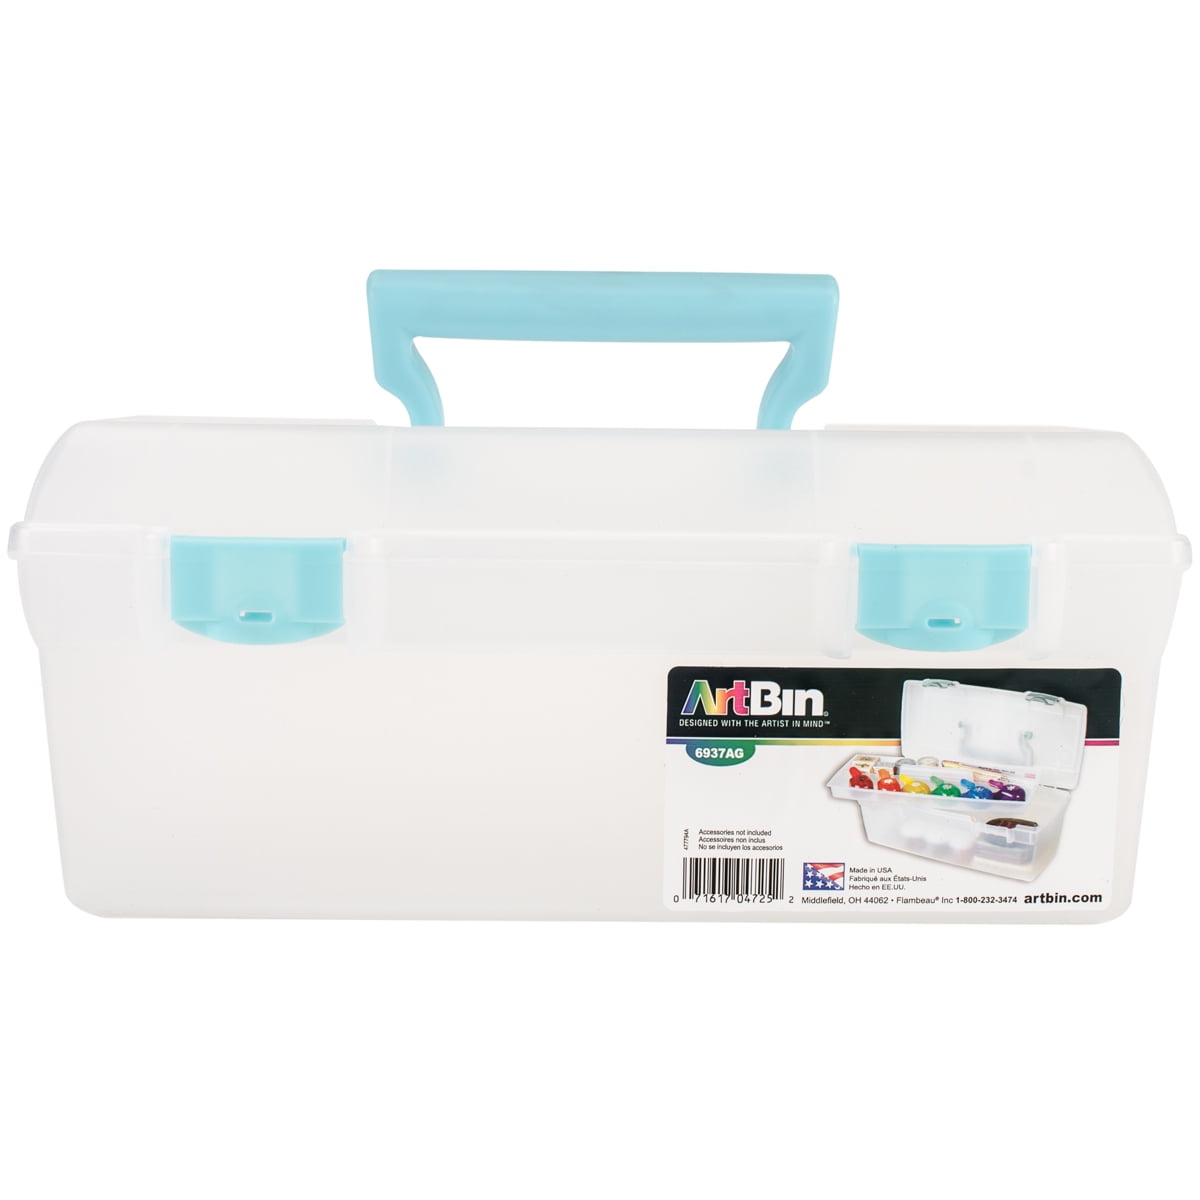  ArtBin 6966AB 16 in. Lift-Out Tray Box, Portable Art & Craft  Organizer with Handle and Tray, Clear